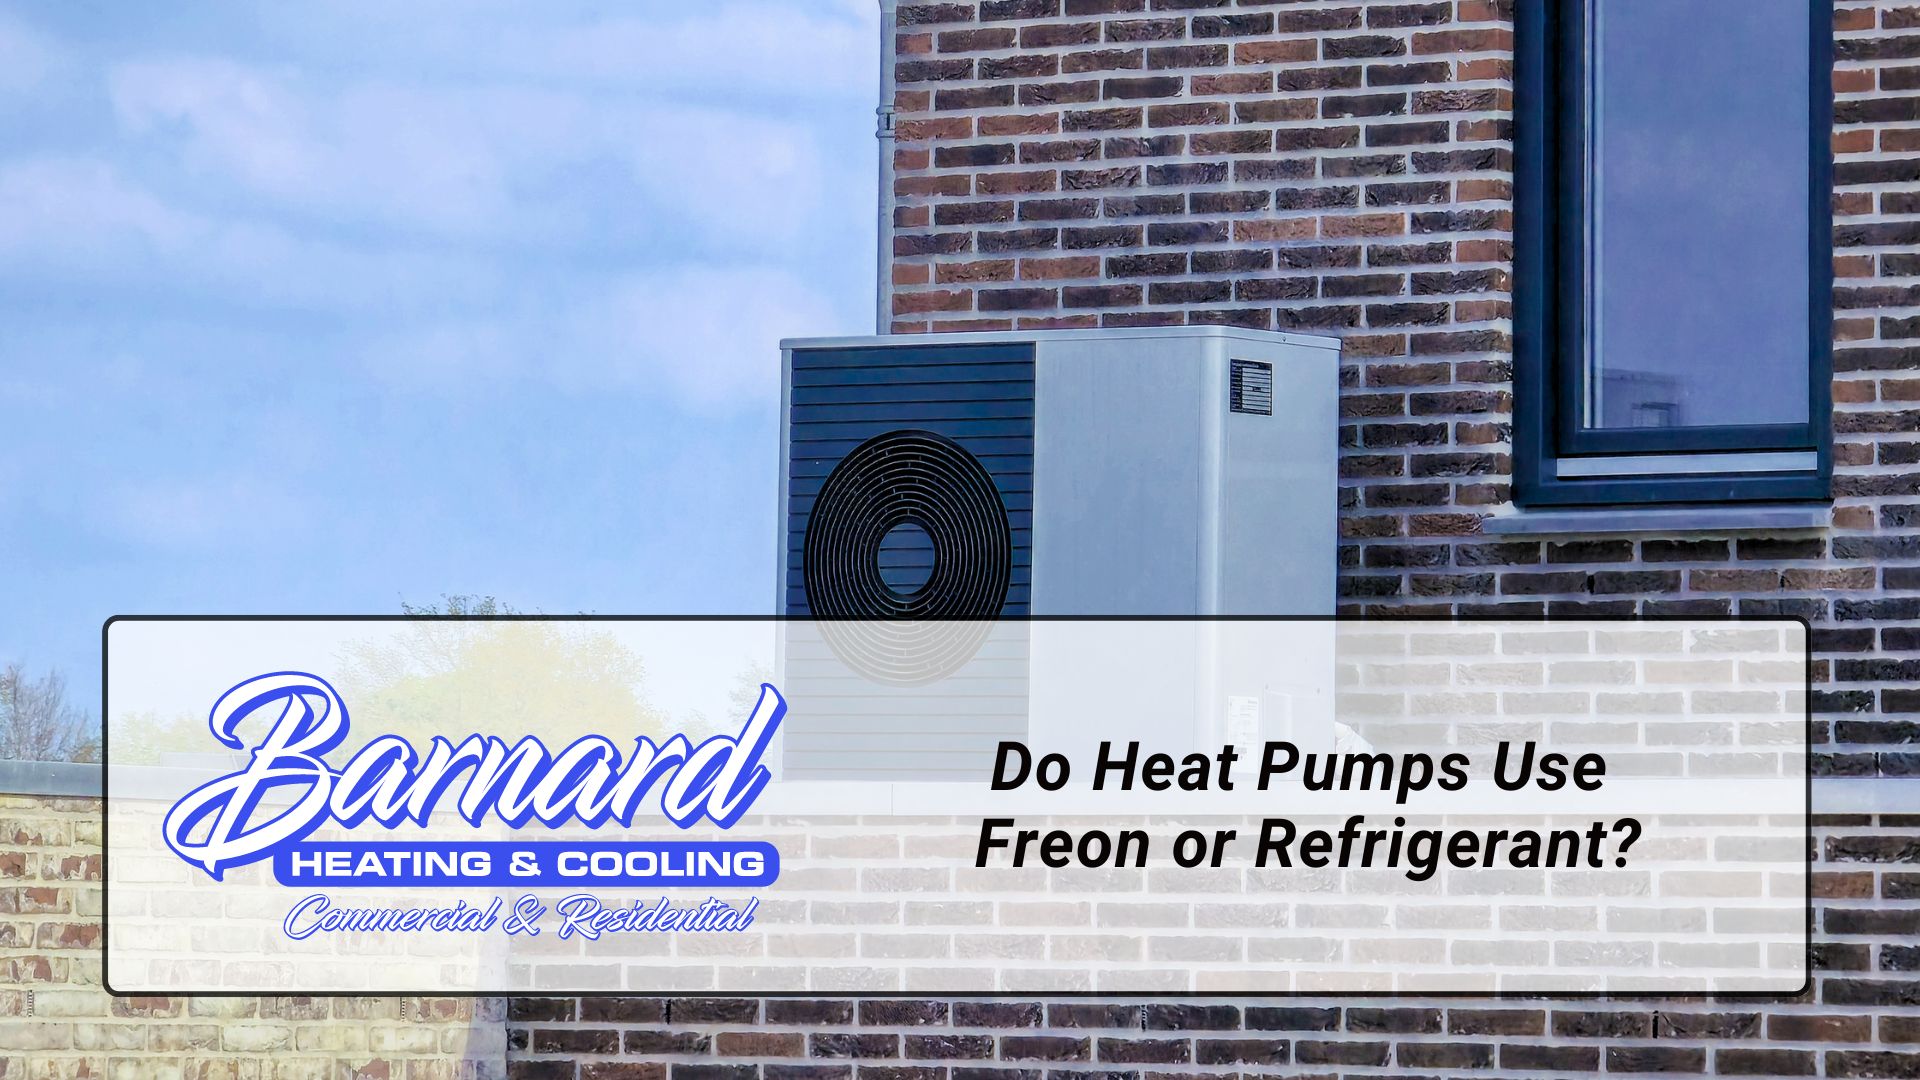 Do Heat Pumps Use Freon or Refrigerant